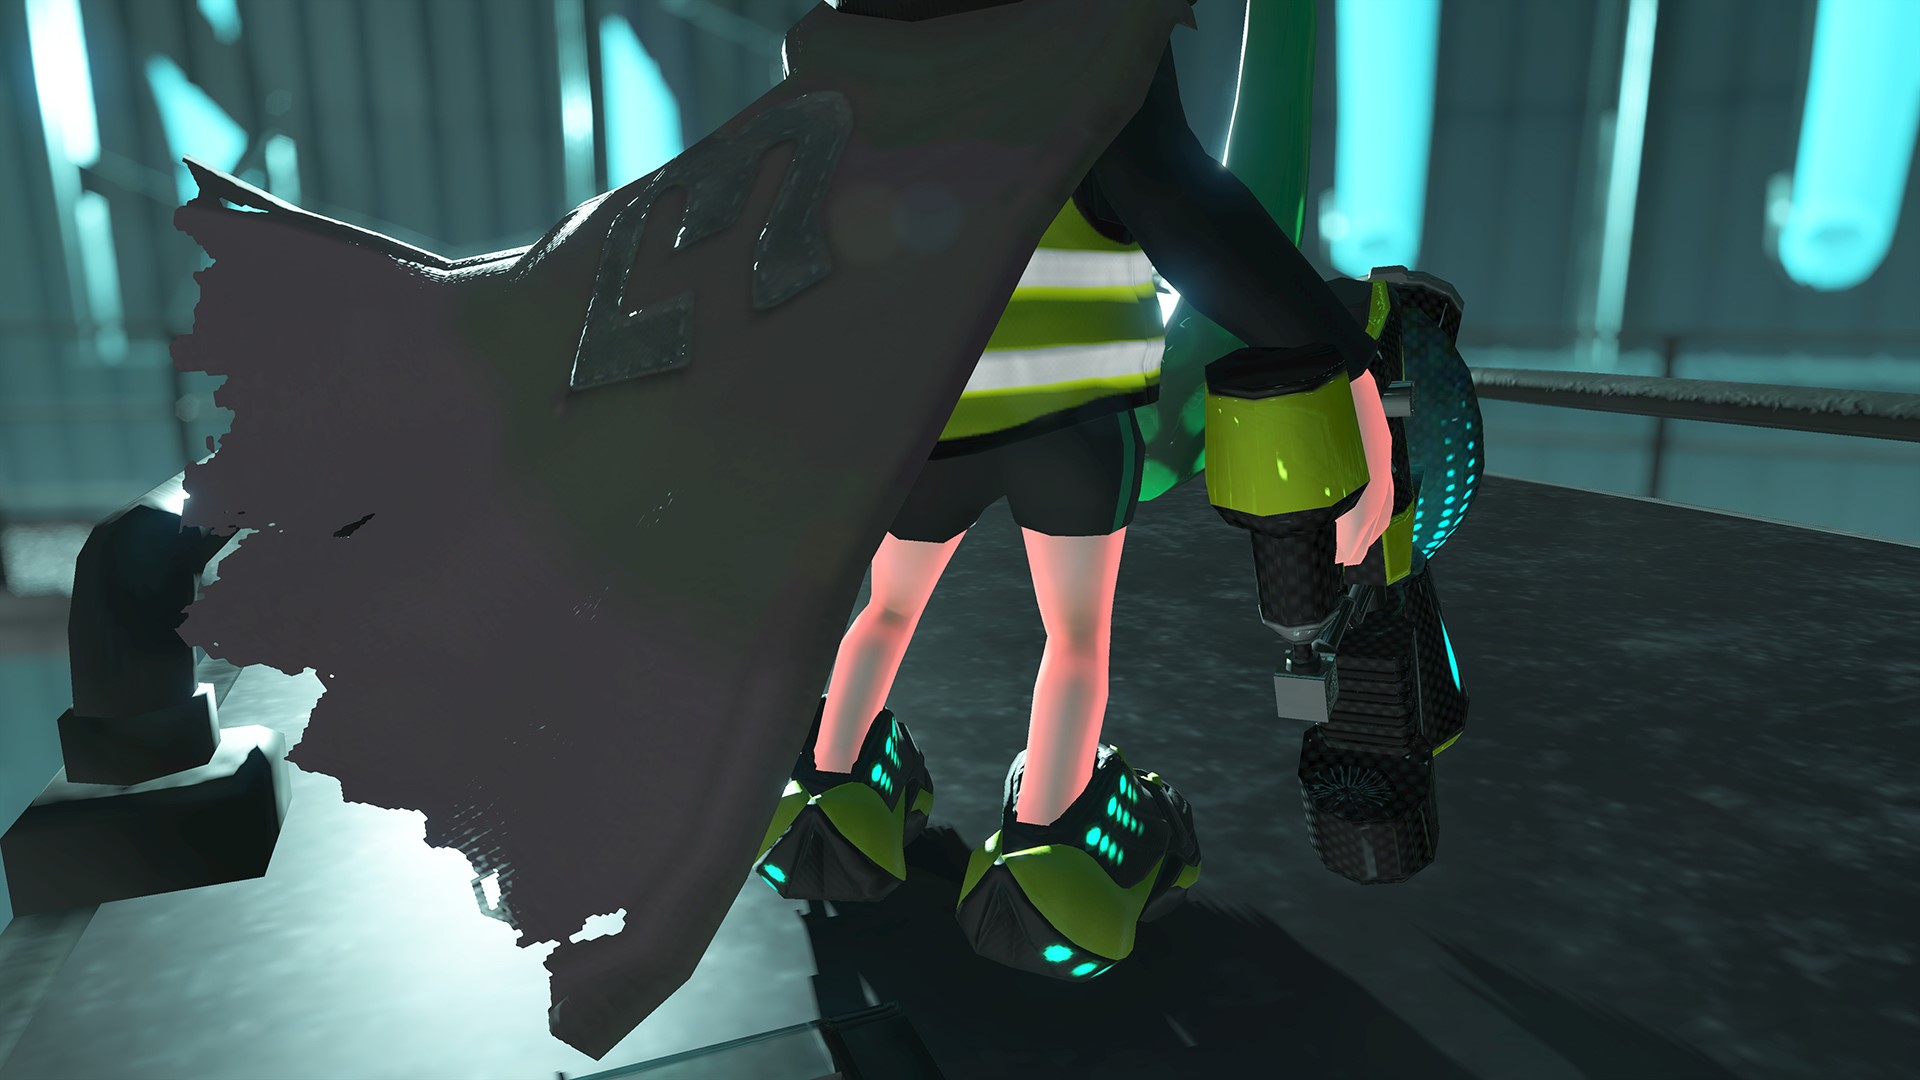 Splatoon 2: Octo Expansion details and images - some Zelda: Breath of the Wild devs ...1920 x 1080